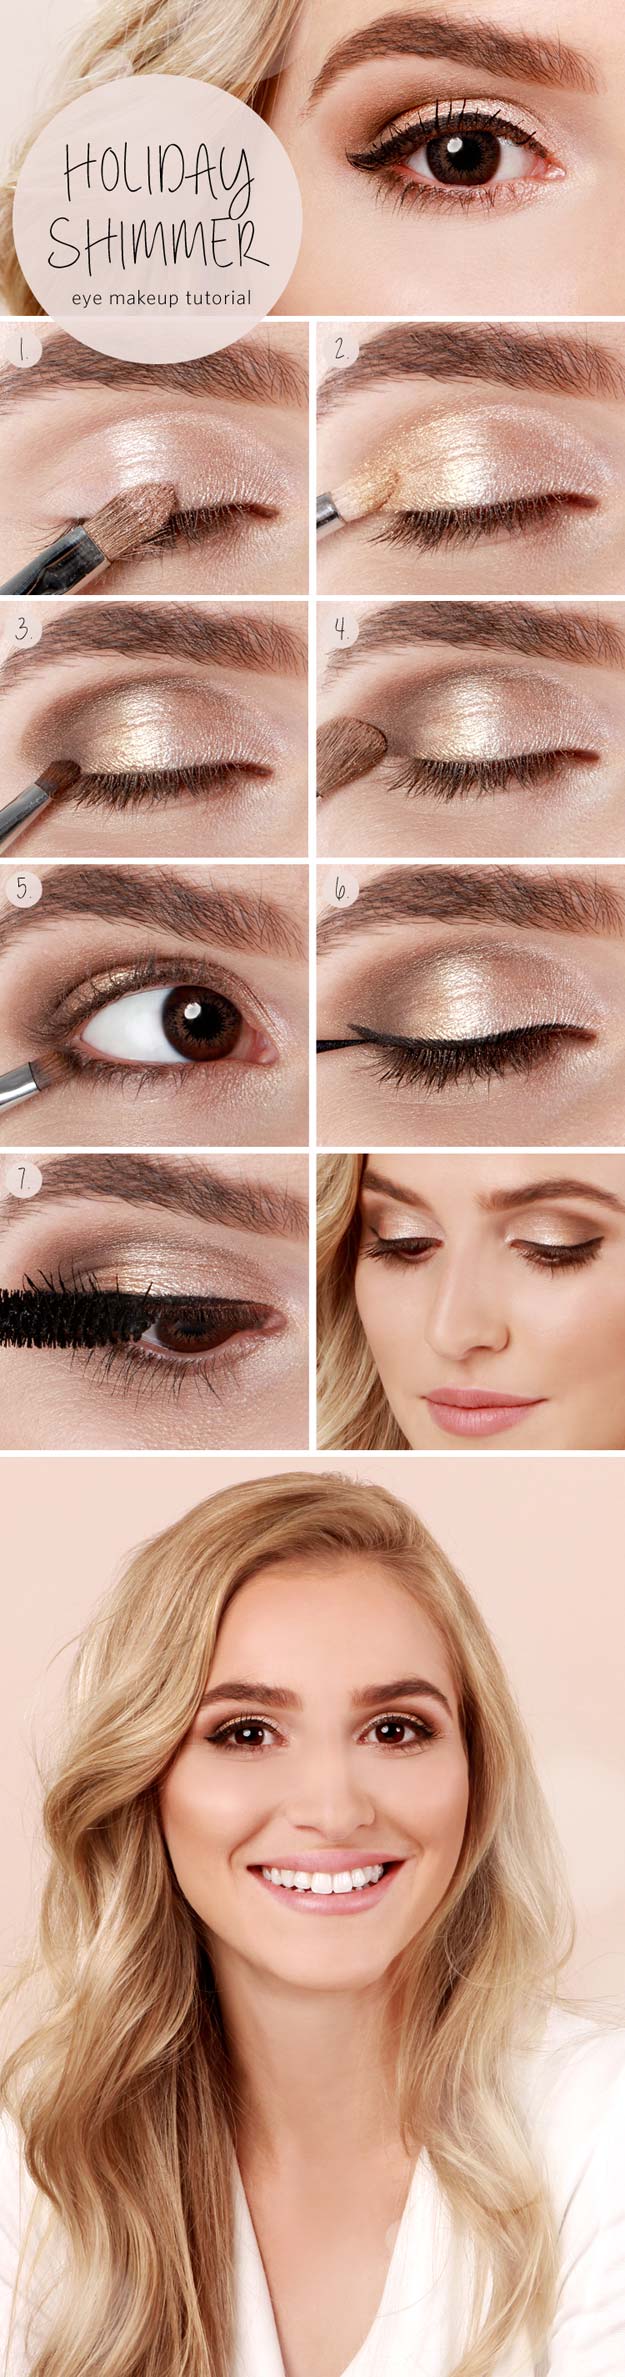 Best Makeup Tutorials for Teens -Holiday Shimmer Eye Tutorial - Easy Makeup Ideas for Beginners - Step by Step Tutorials for Foundation, Eye Shadow, Lipstick, Cheeks, Contour, Eyebrows and Eyes - Awesome Makeup Hacks and Tips for Simple DIY Beauty - Day and Evening Looks http://diyprojectsforteens.com/makeup-tutorials-teens 